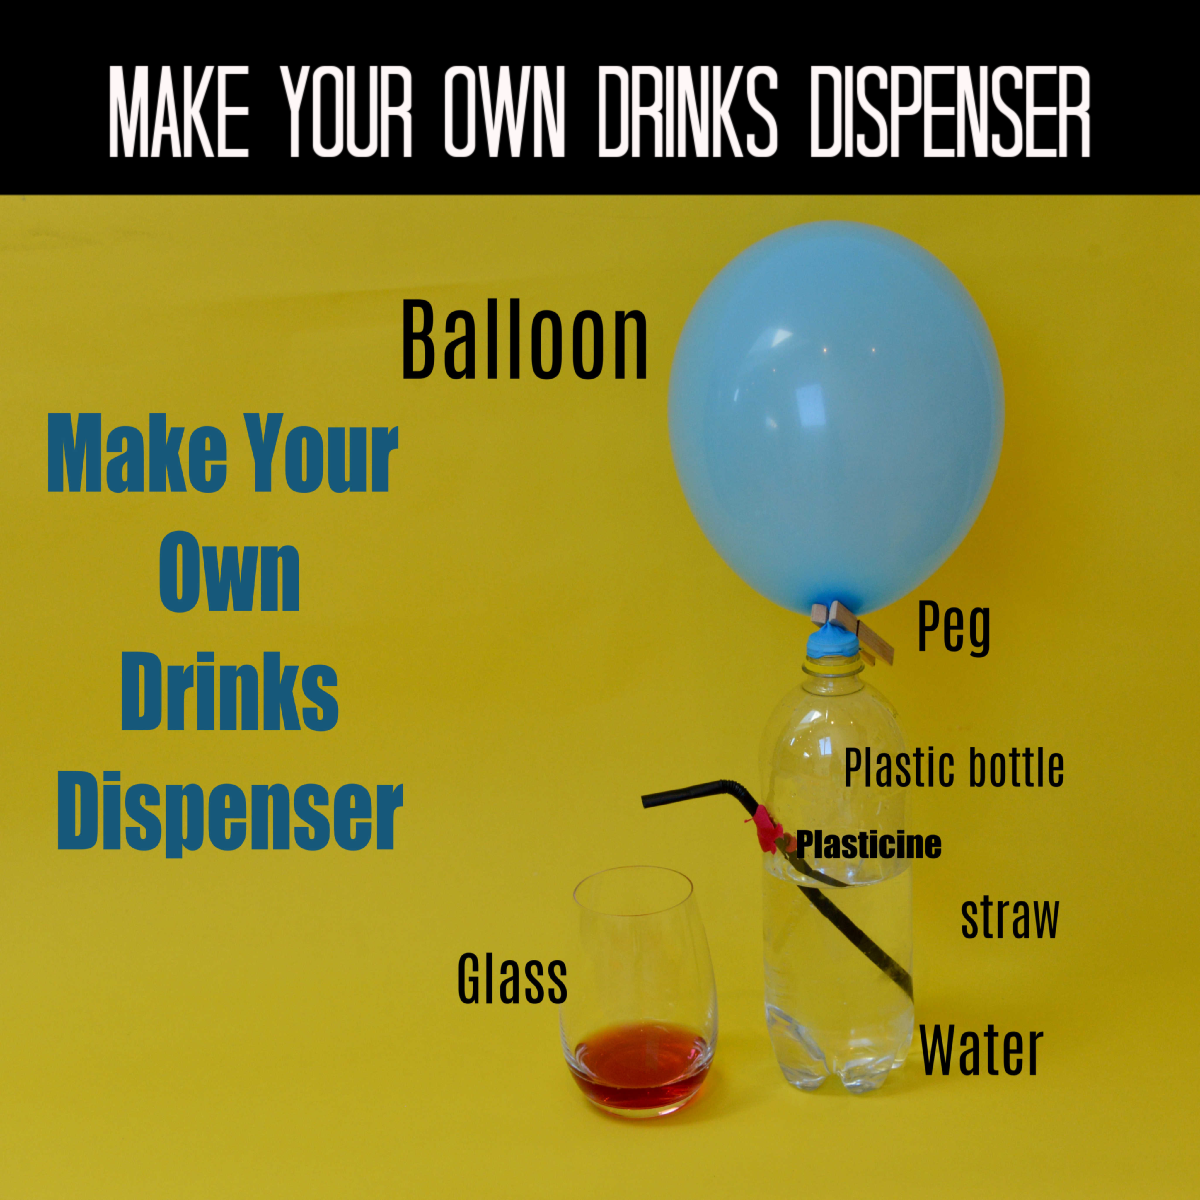 Make your own DIY drinks dispenser using a plastic bottle, balloon and straw. Great for an air pressure demonstration